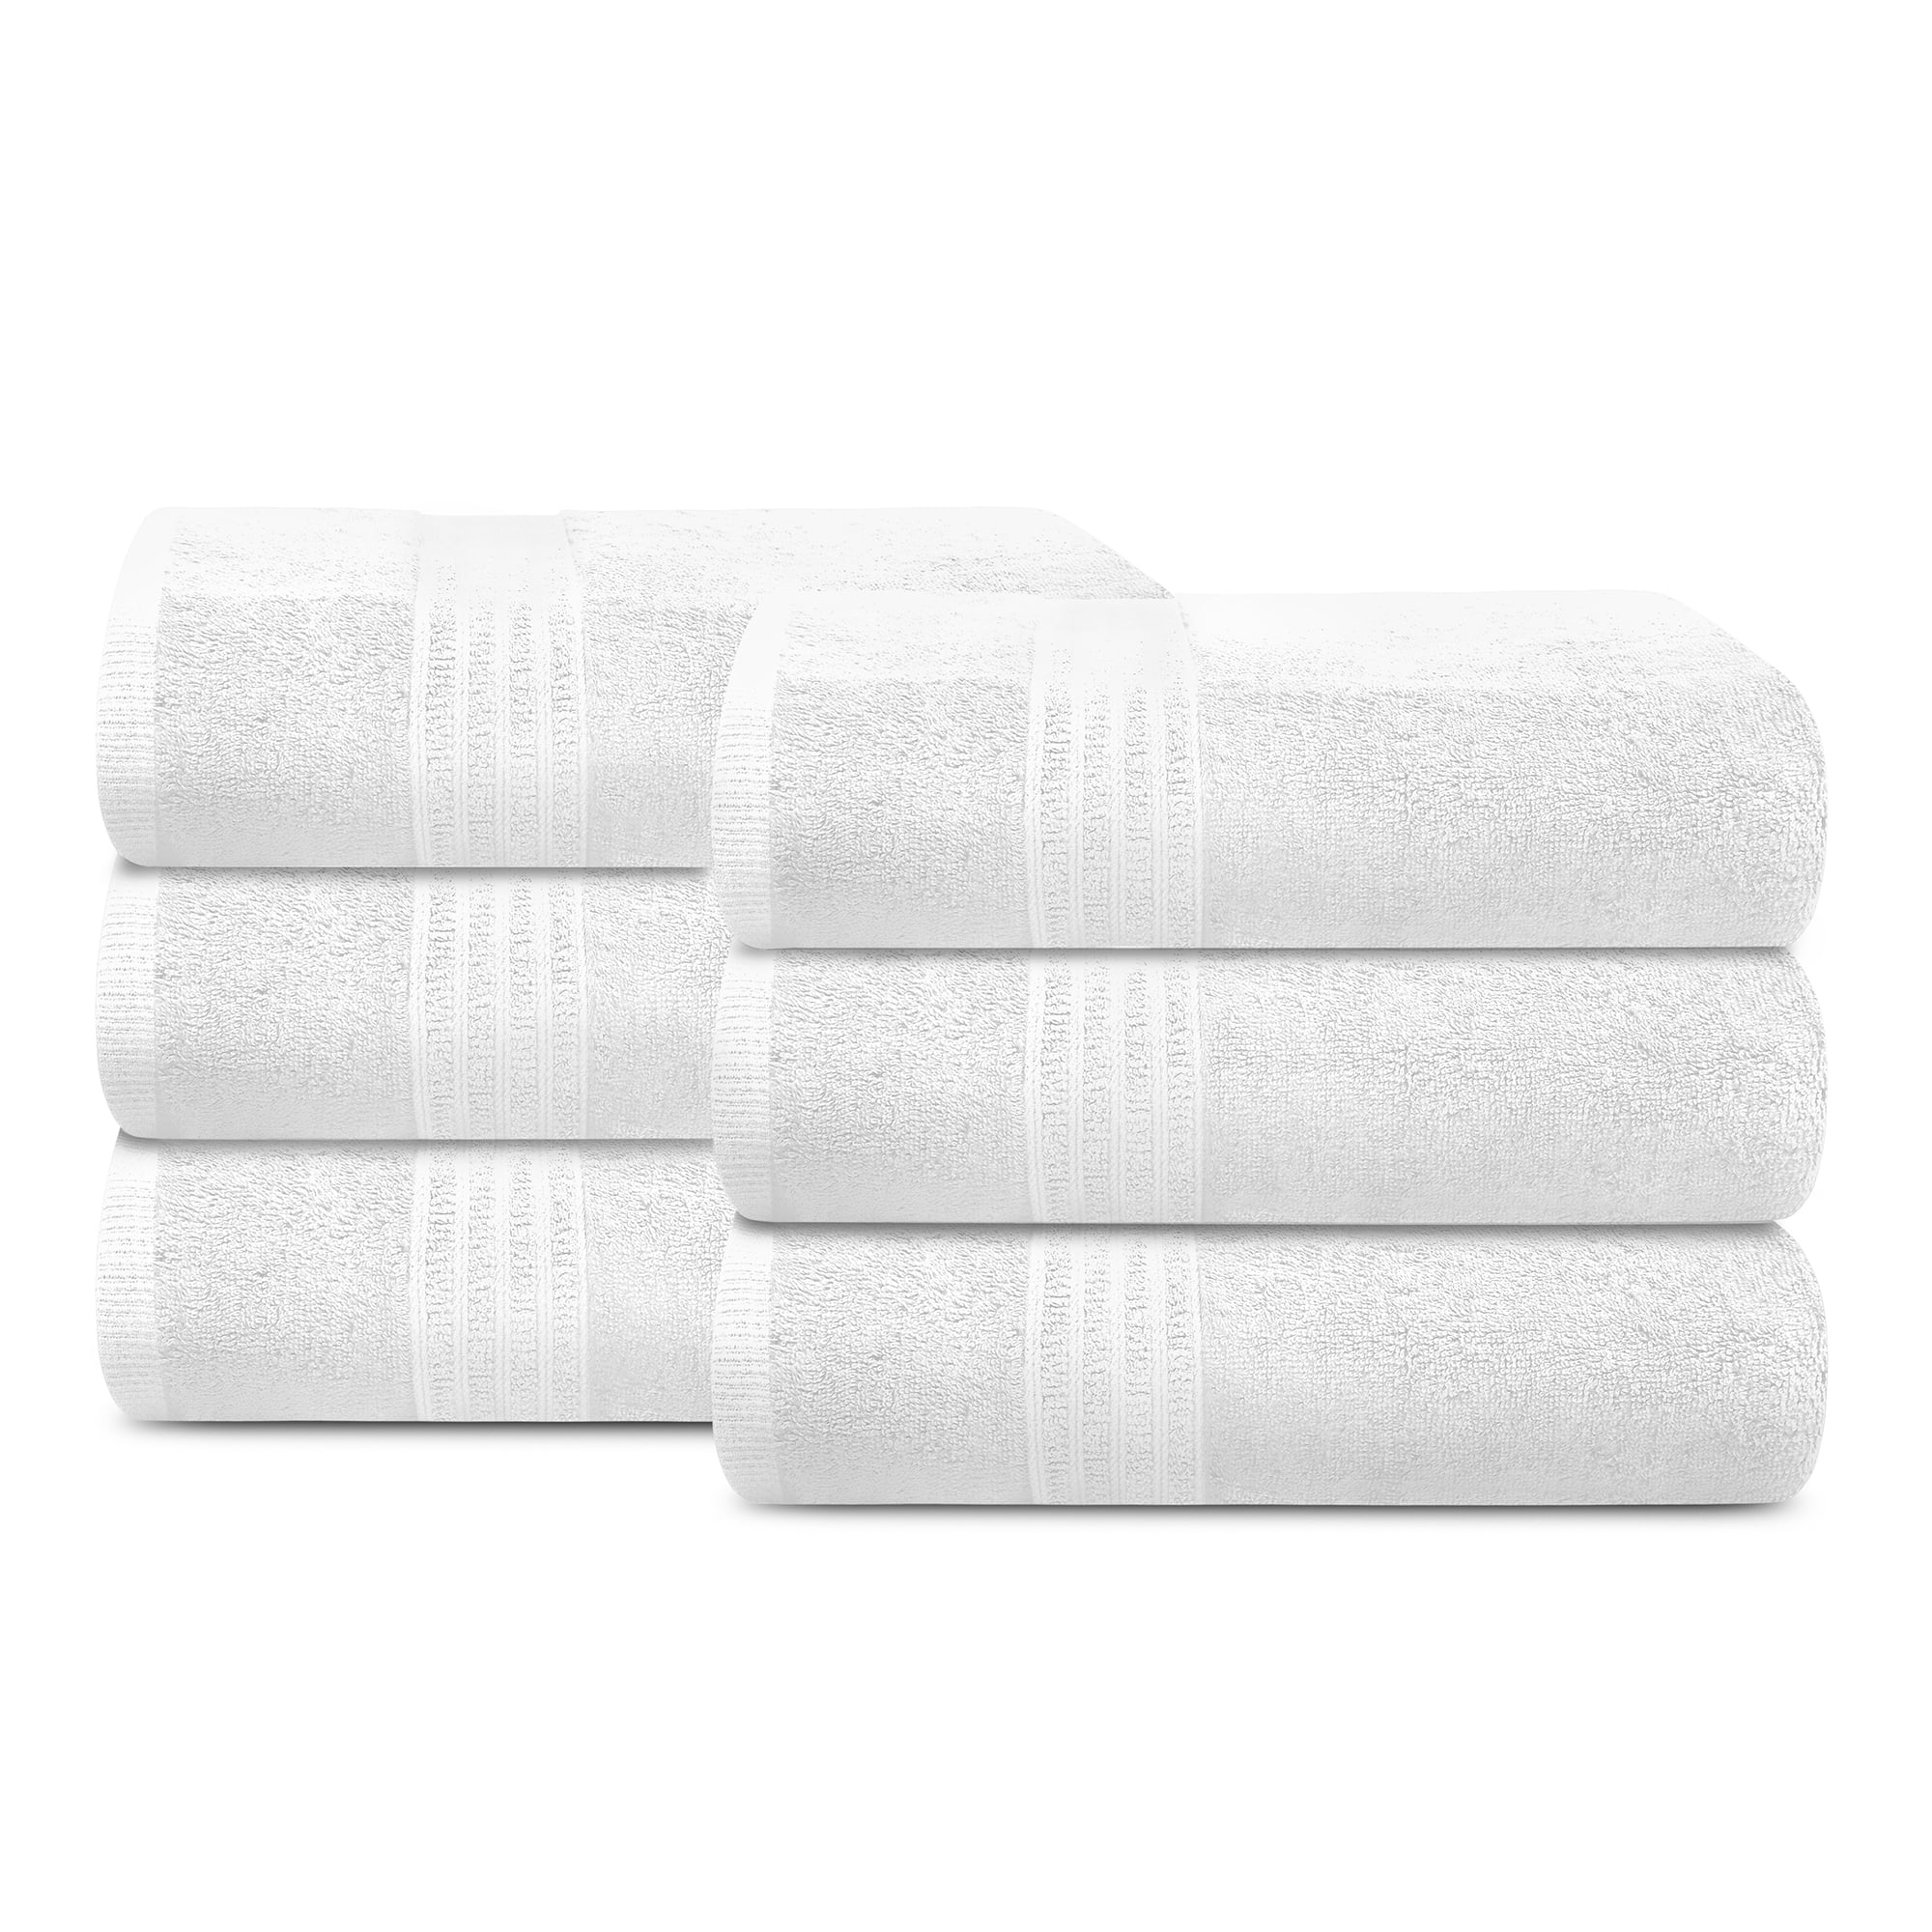 wide smile 2 Piece Bath Towel Set Coffee 1 Bath Towels and 1 Hand Towels Cotton Hotel Quality Super Soft and Highly Absorbent